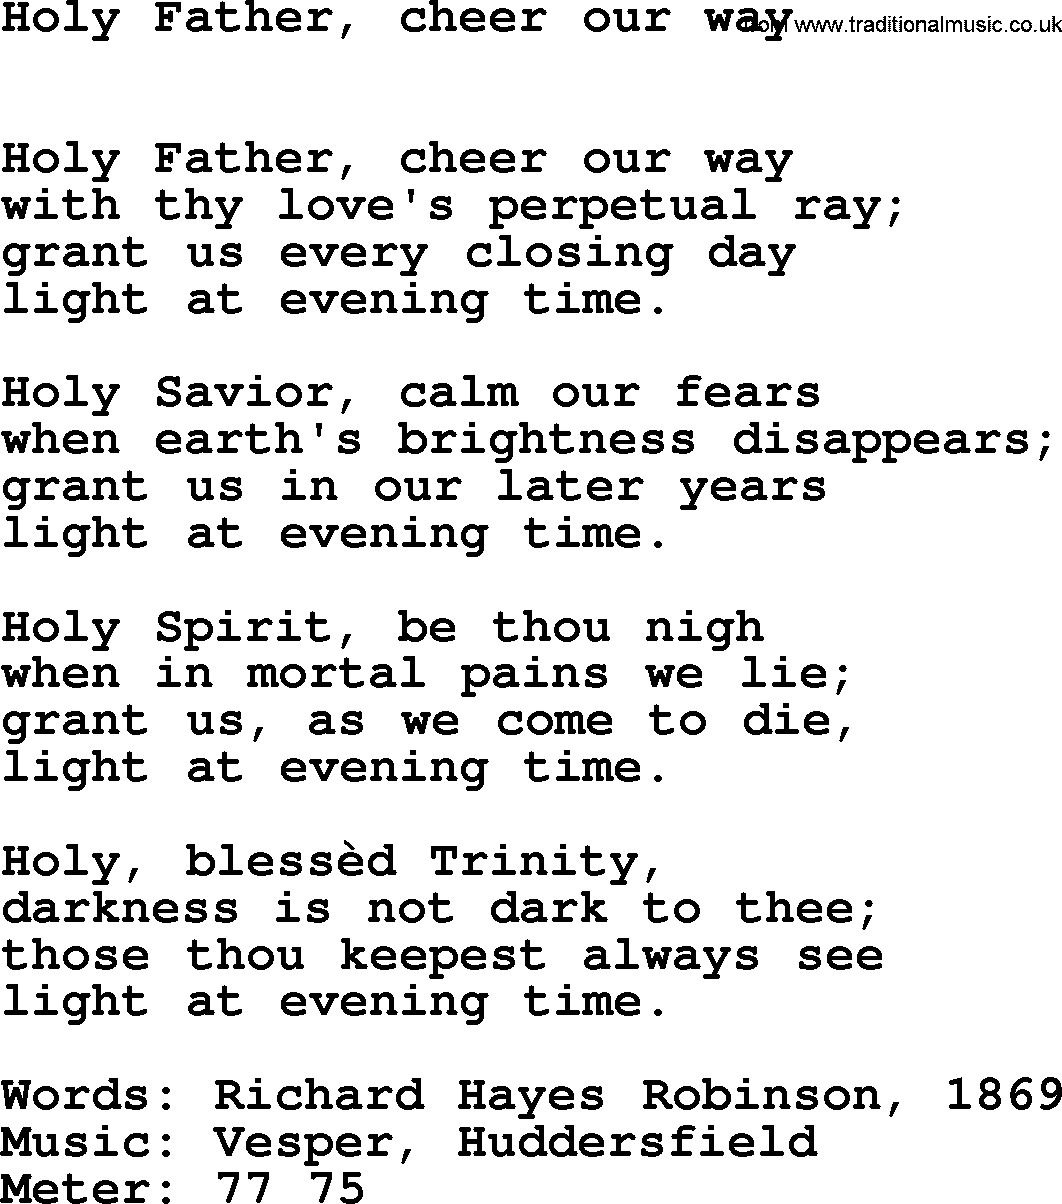 Book of Common Praise Hymn: Holy Father, Cheer Our Way.txt lyrics with midi music